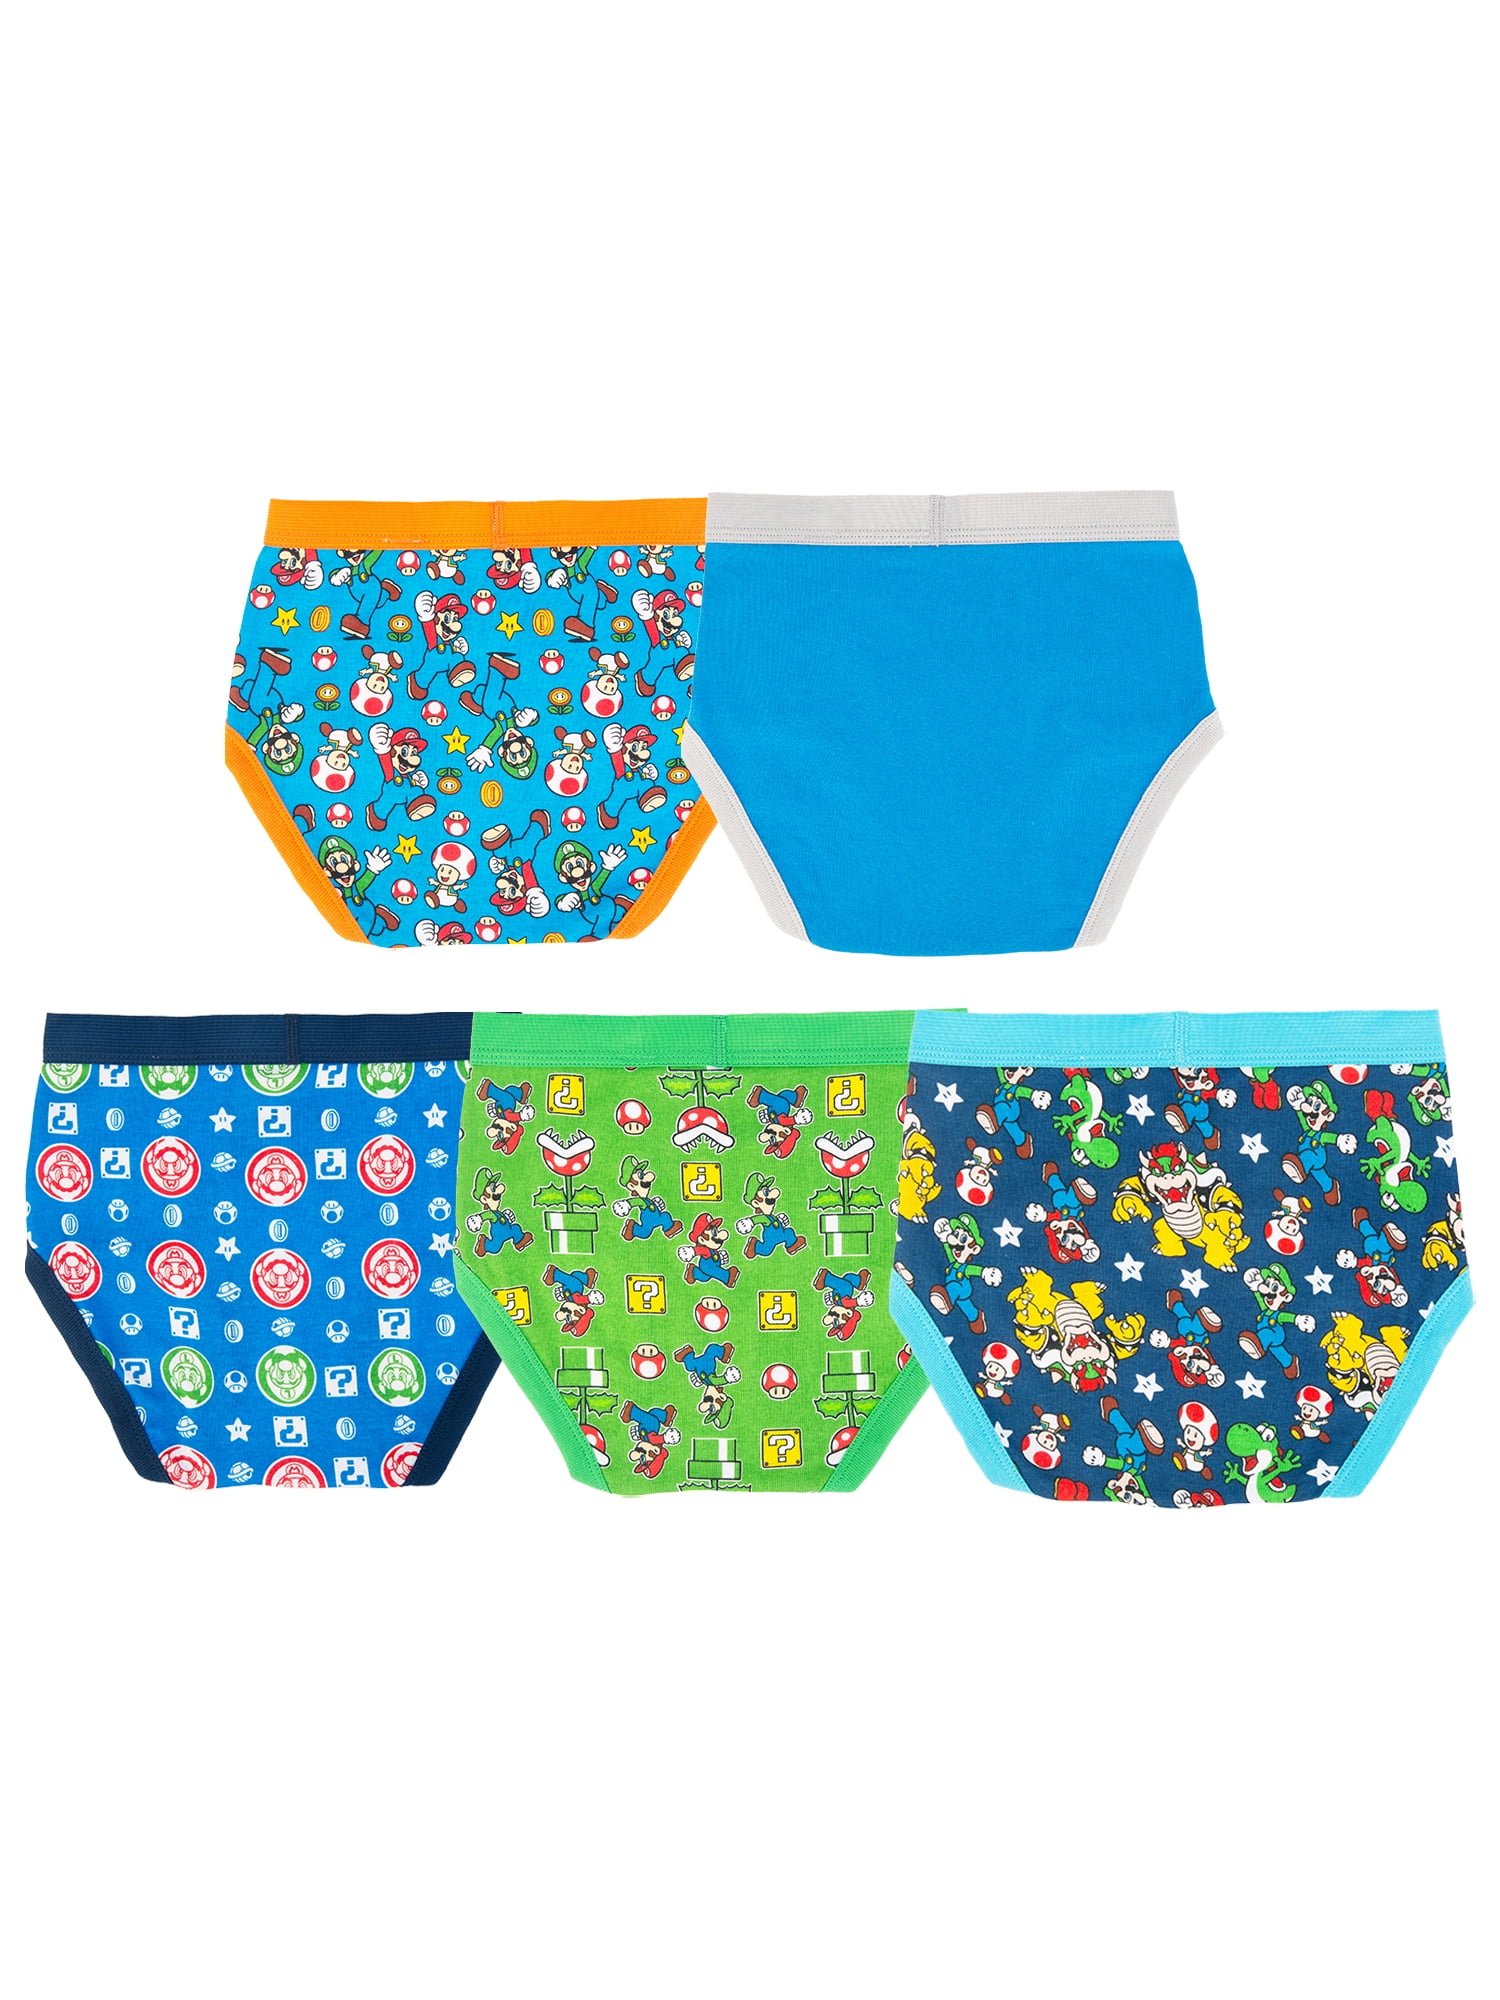 Boys Mario Bros. 5 Pack Character Underwear, Size 4-8 